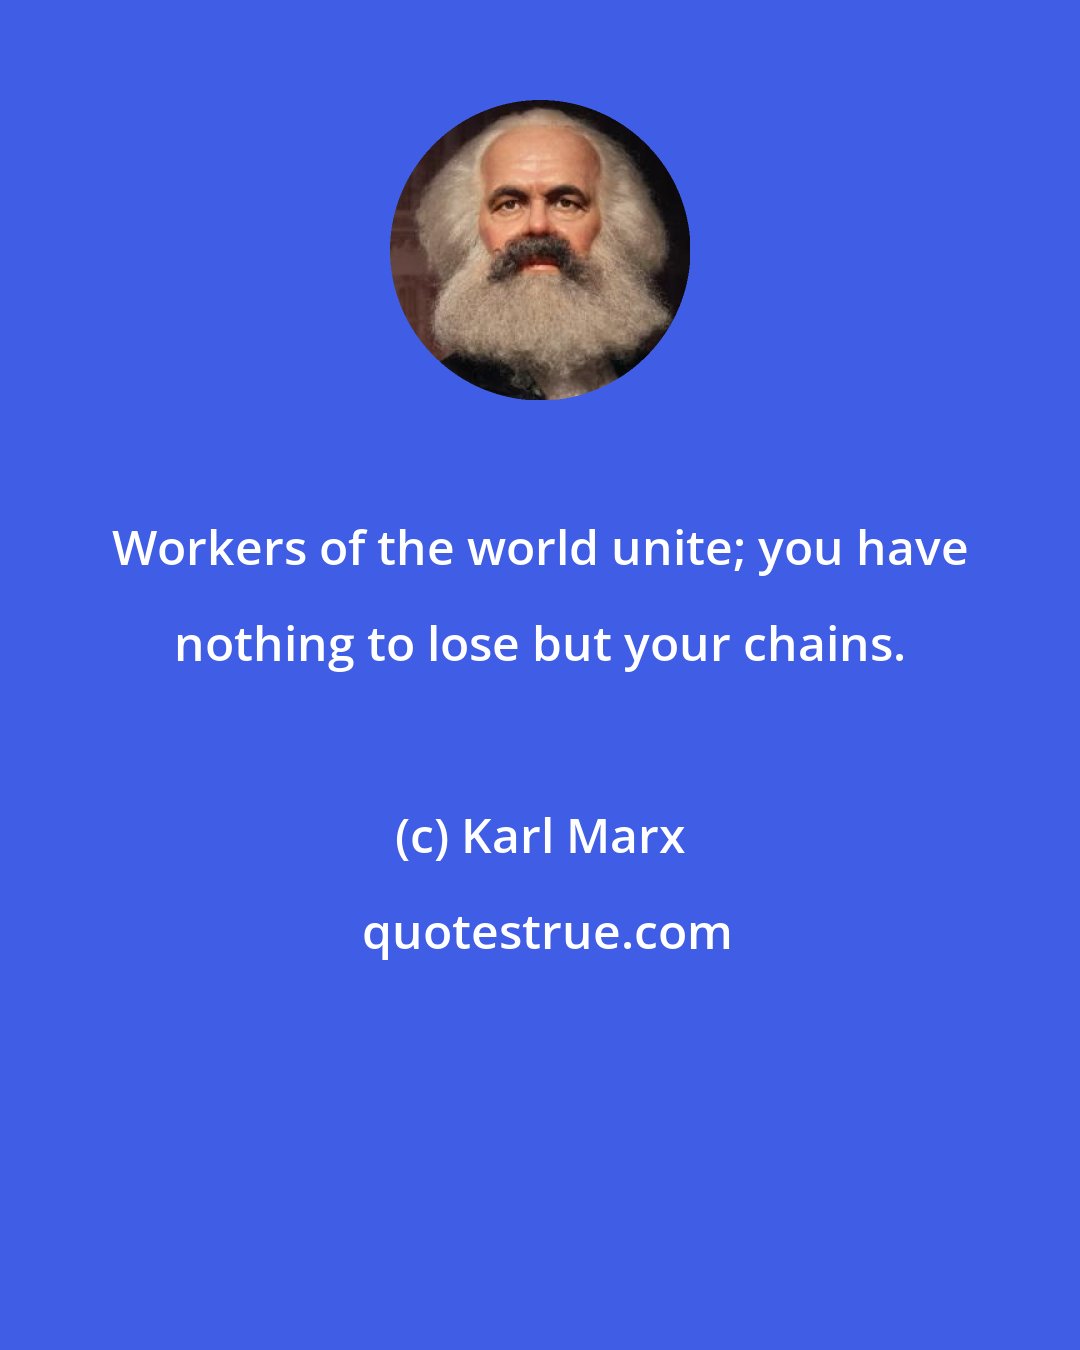 Karl Marx: Workers of the world unite; you have nothing to lose but your chains.